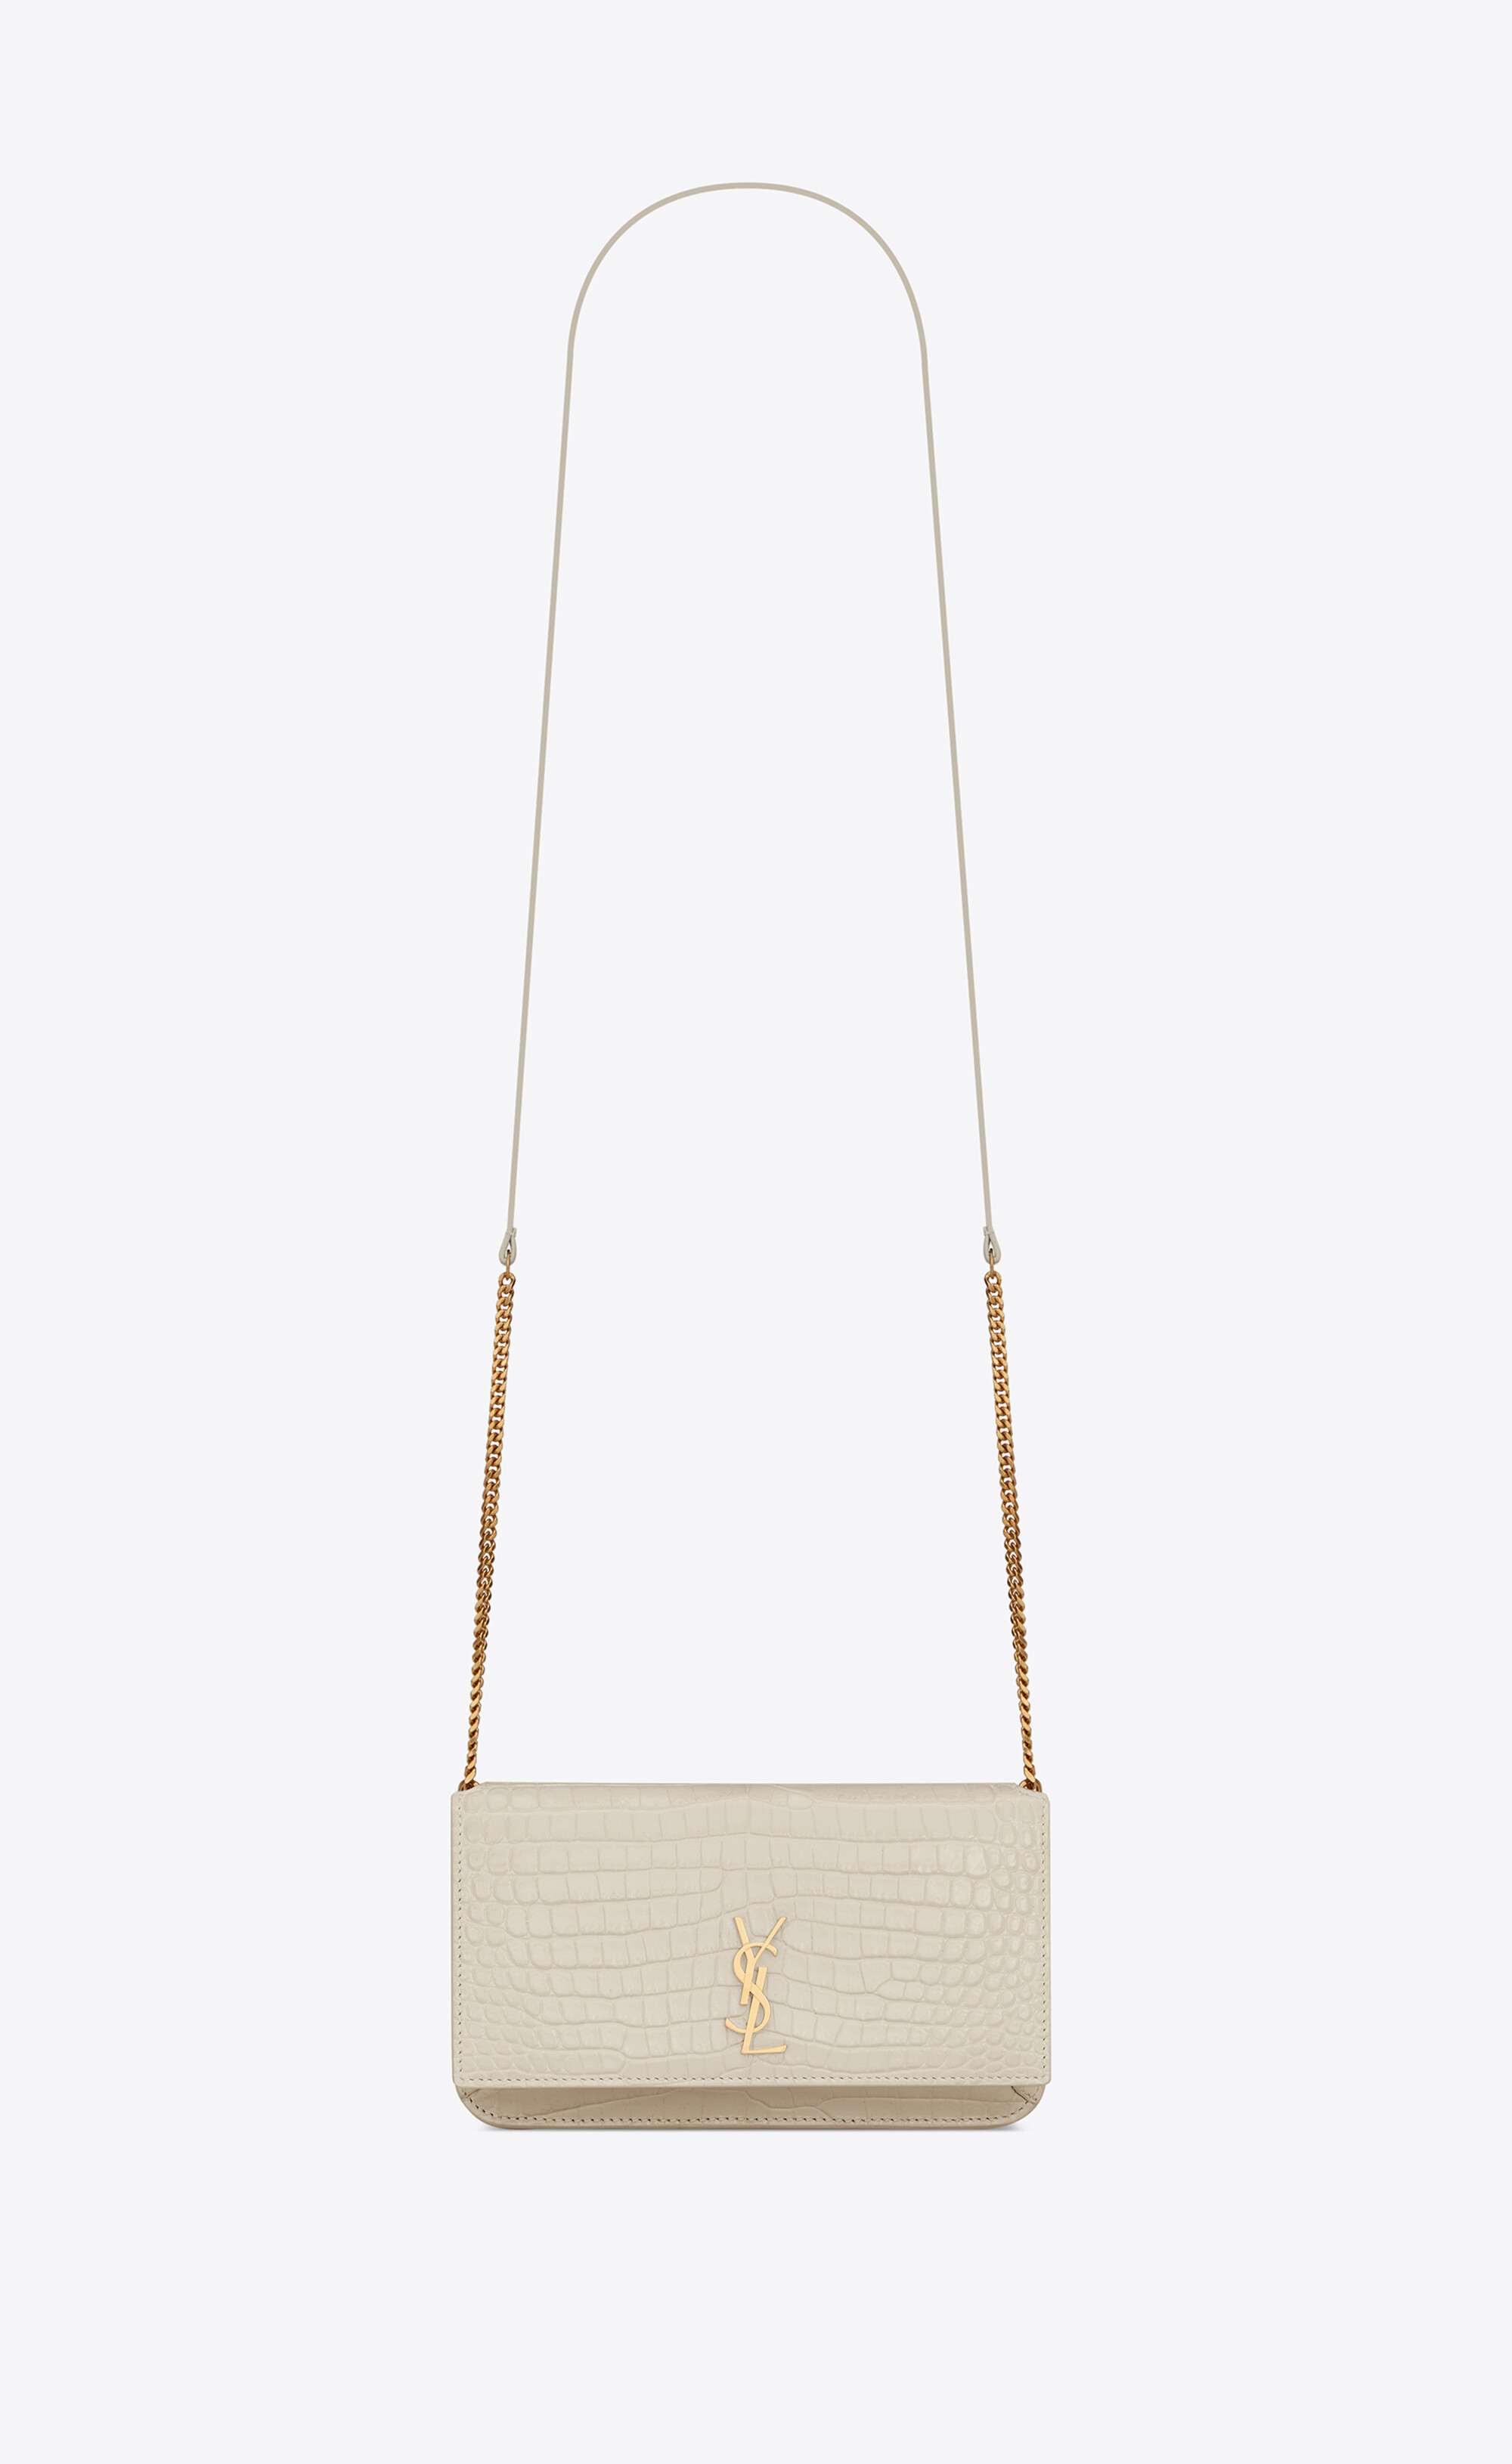 CASSANDRE phone holder with strap in SHINY crocodile-embossed leather, Saint Laurent